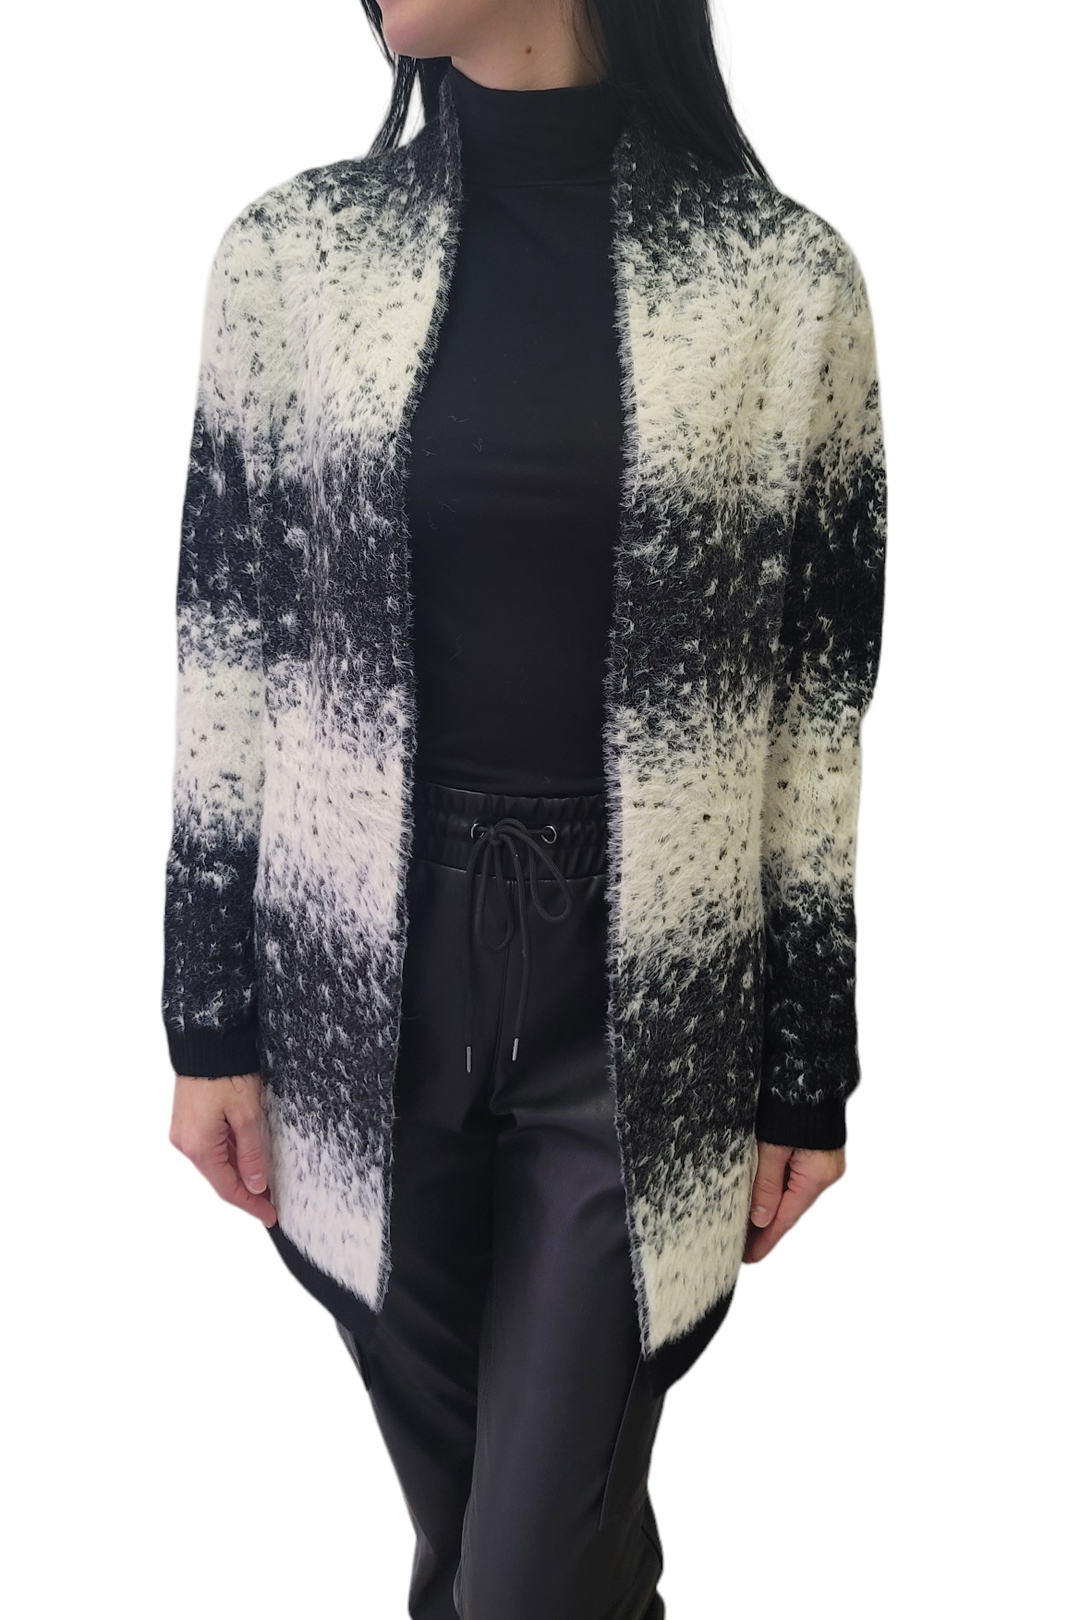 Kamana Ombre Black and White Cardigan